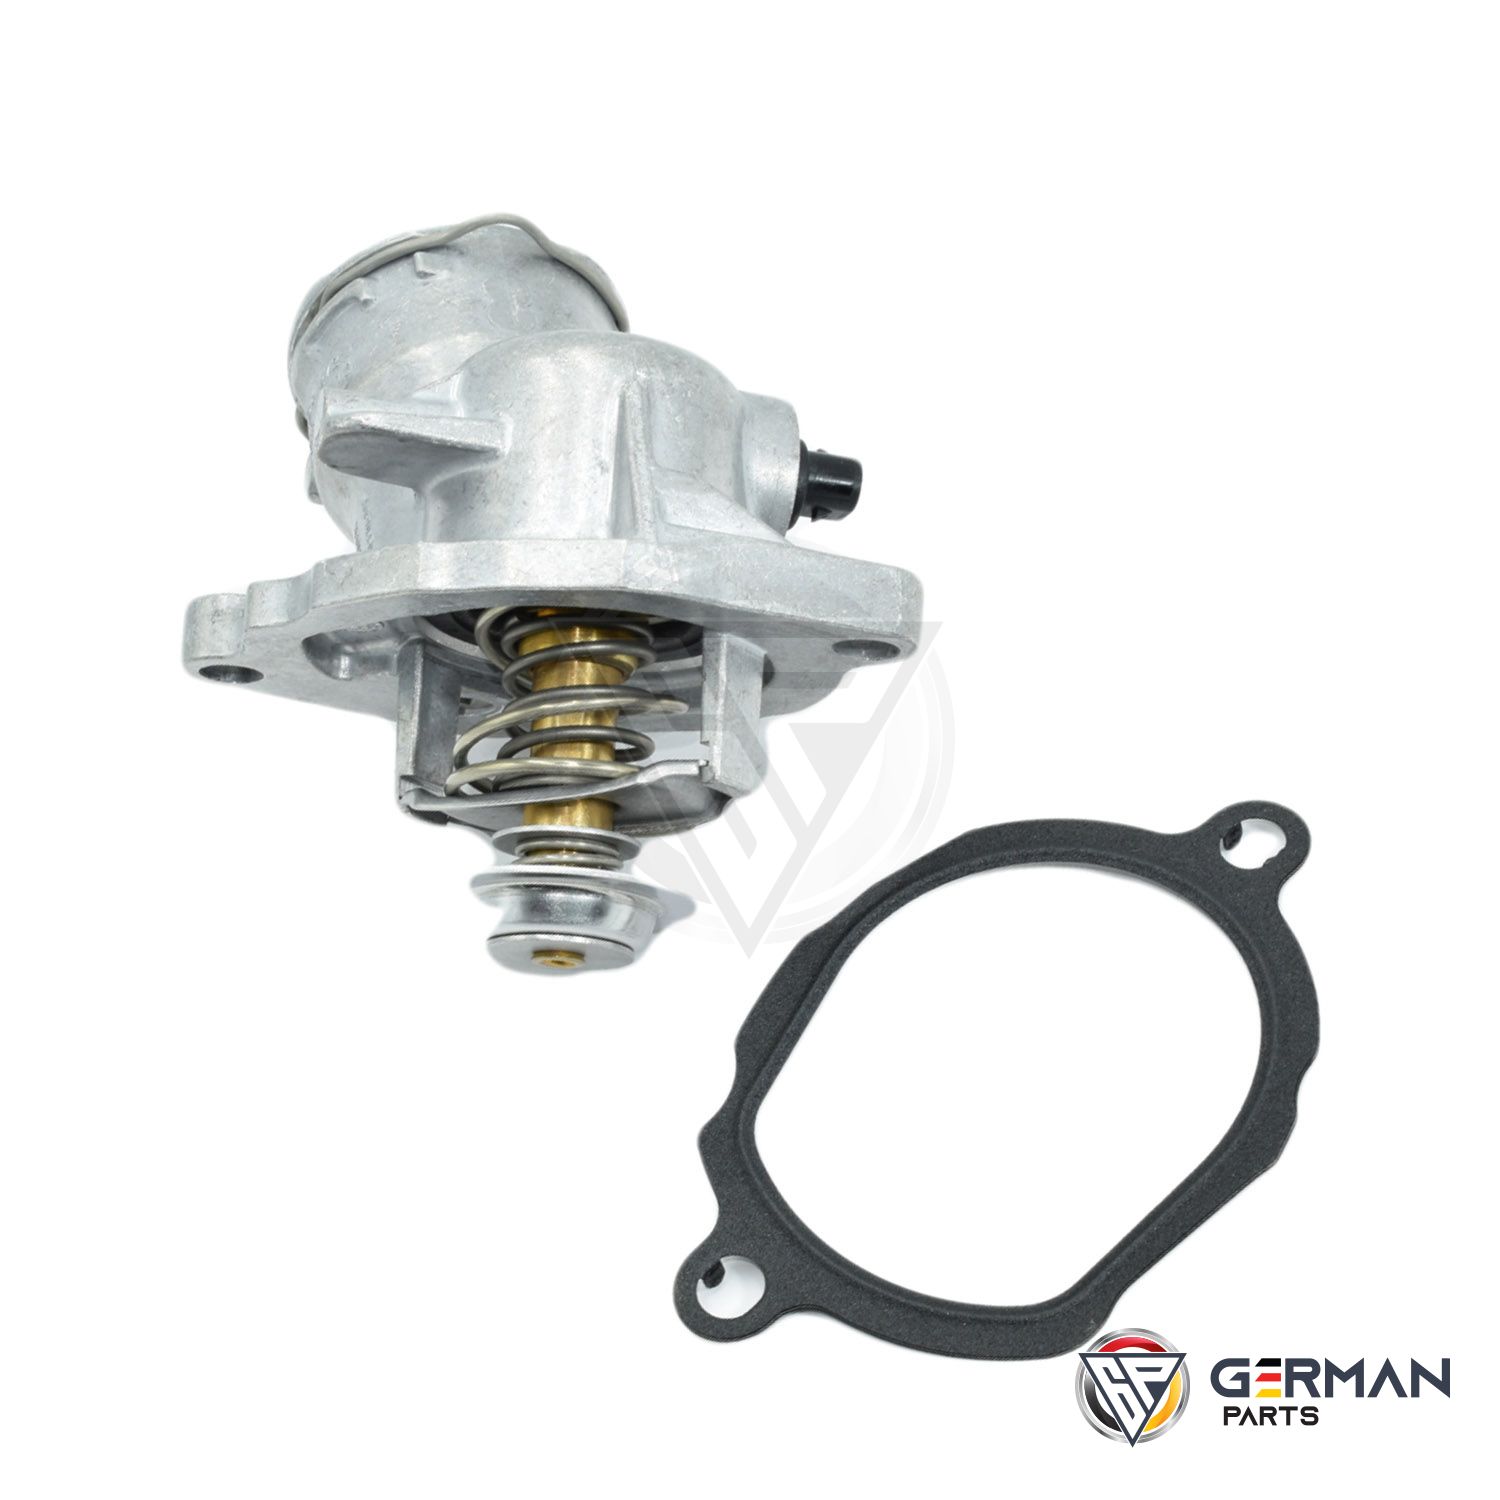 Buy Mercedes Benz Thermostat Assembly 2722000515 - German Parts